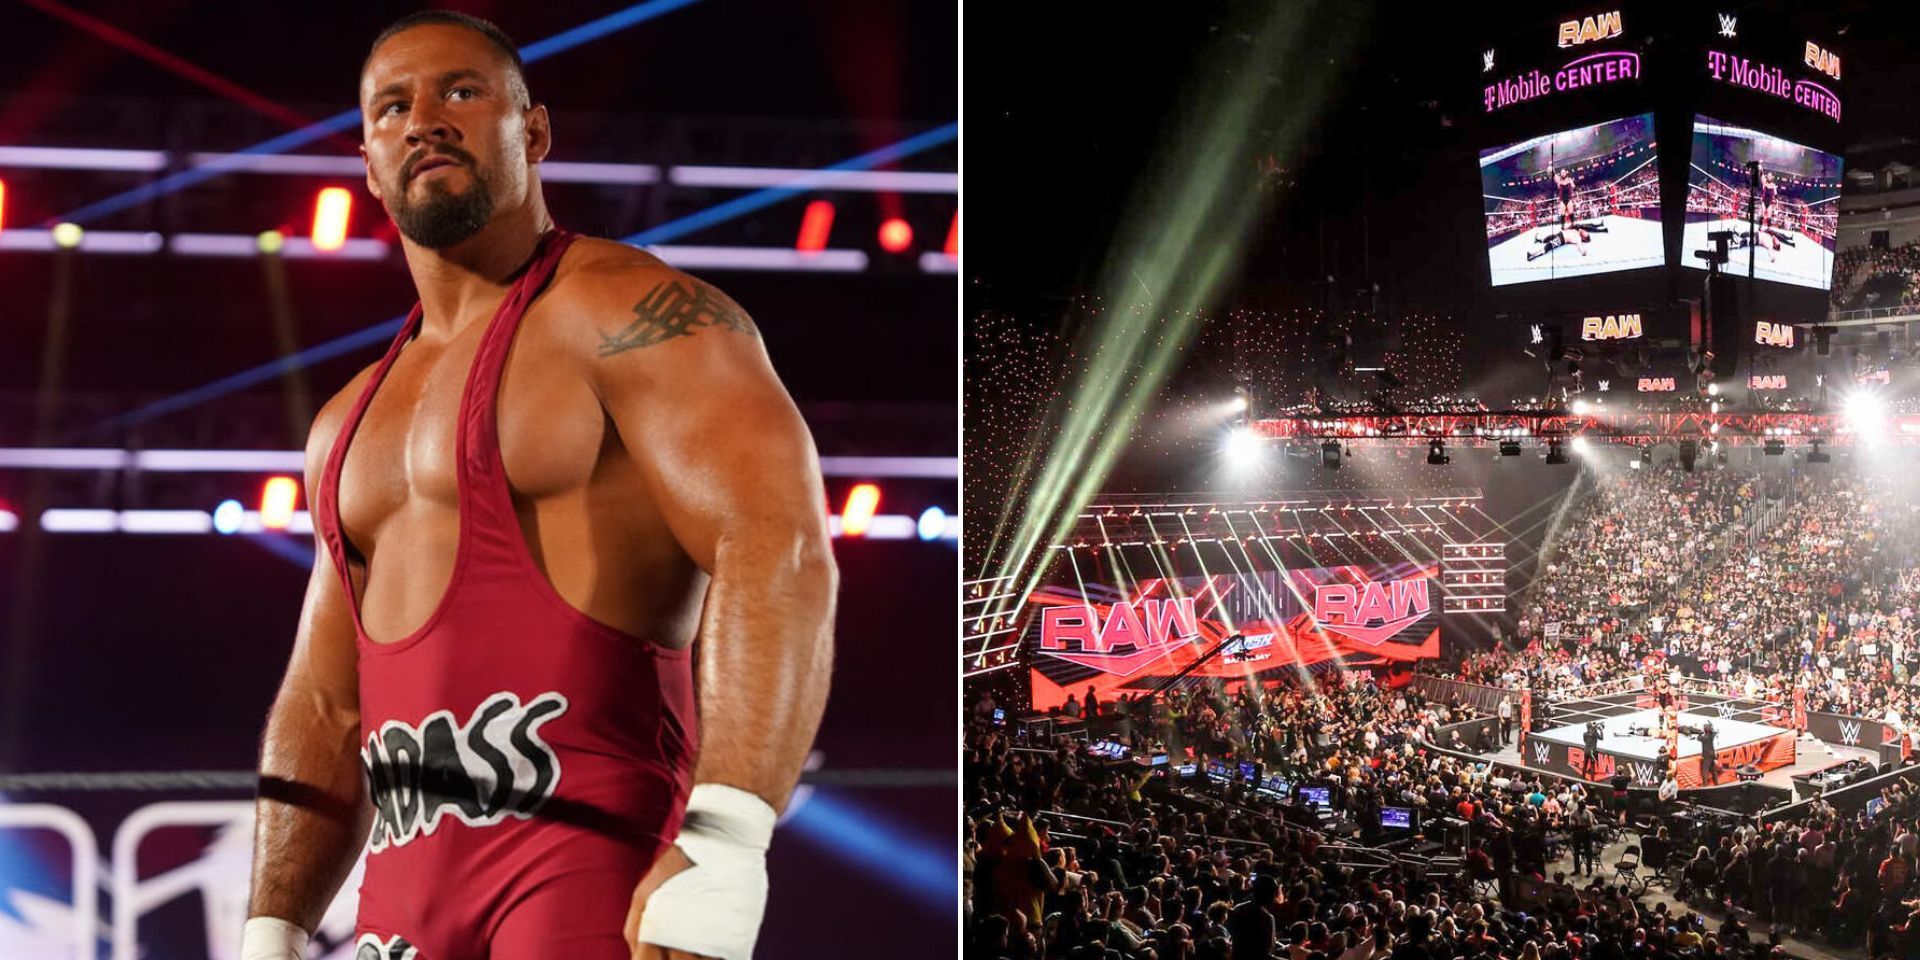 Bron Breakker was unable to get the victory on RAW (Images via WWE.com)